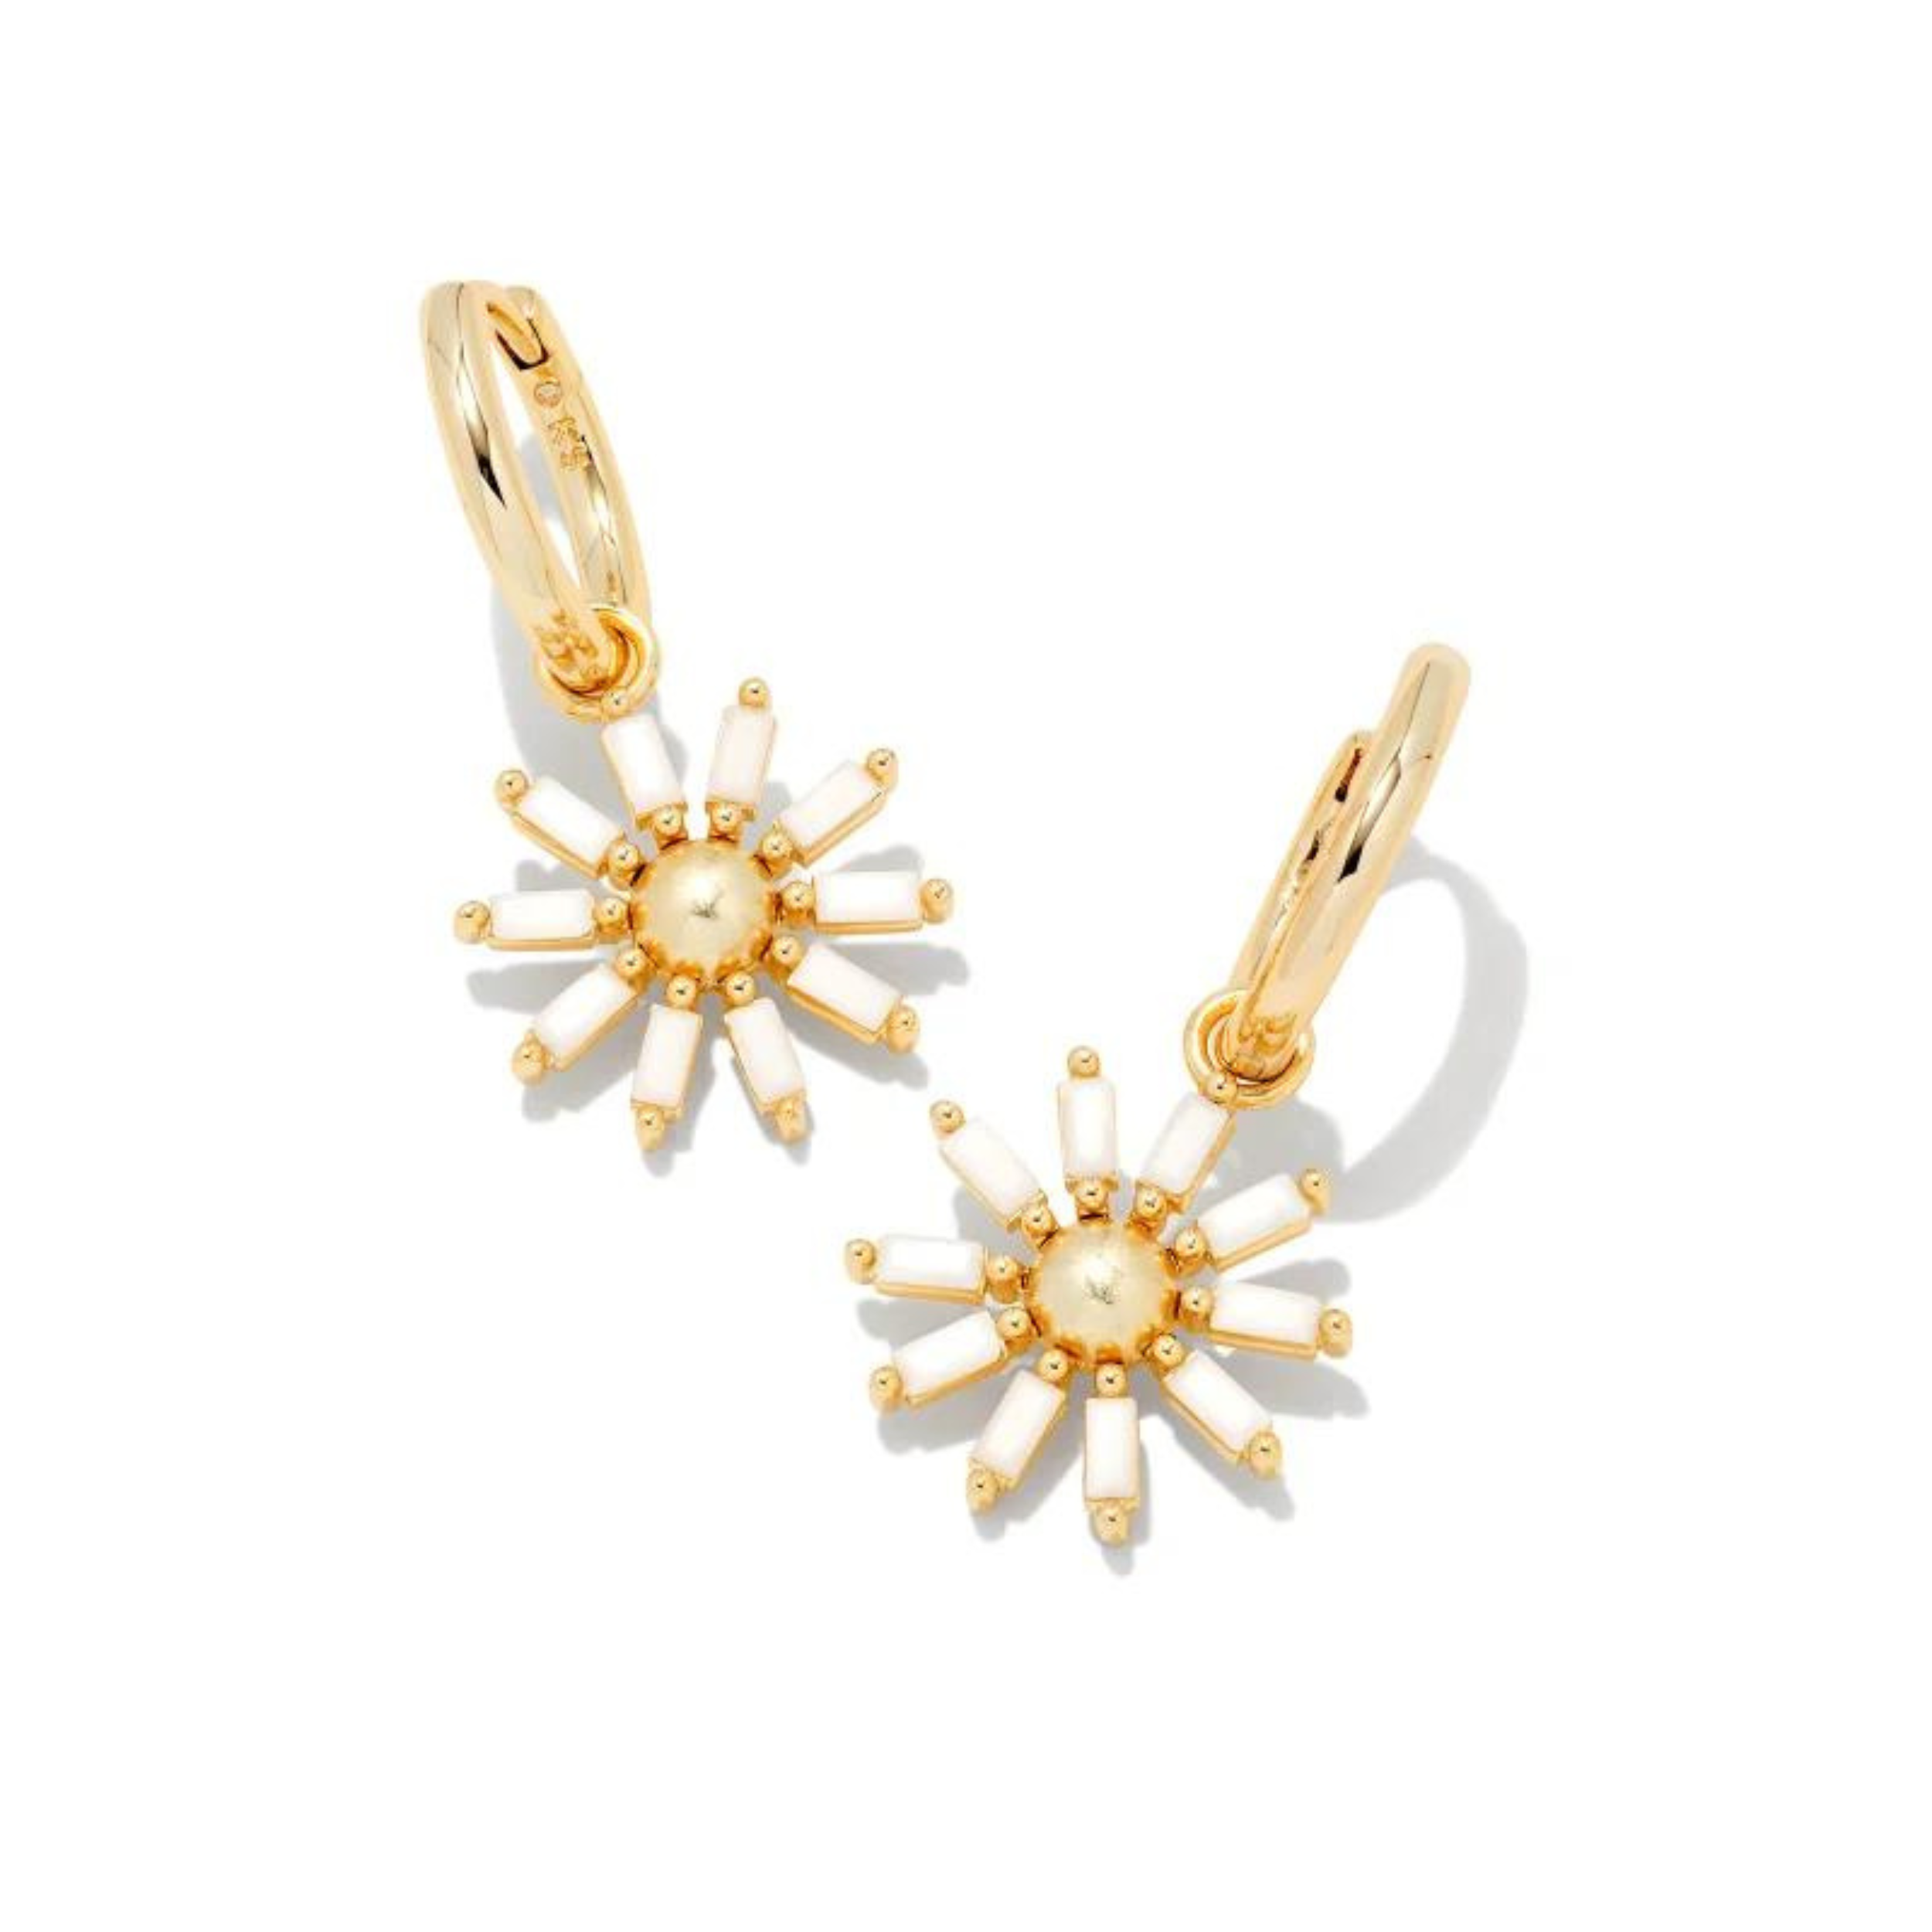 Gold flower hoop dangle earrings in white opaque glass, pictured on a white background.